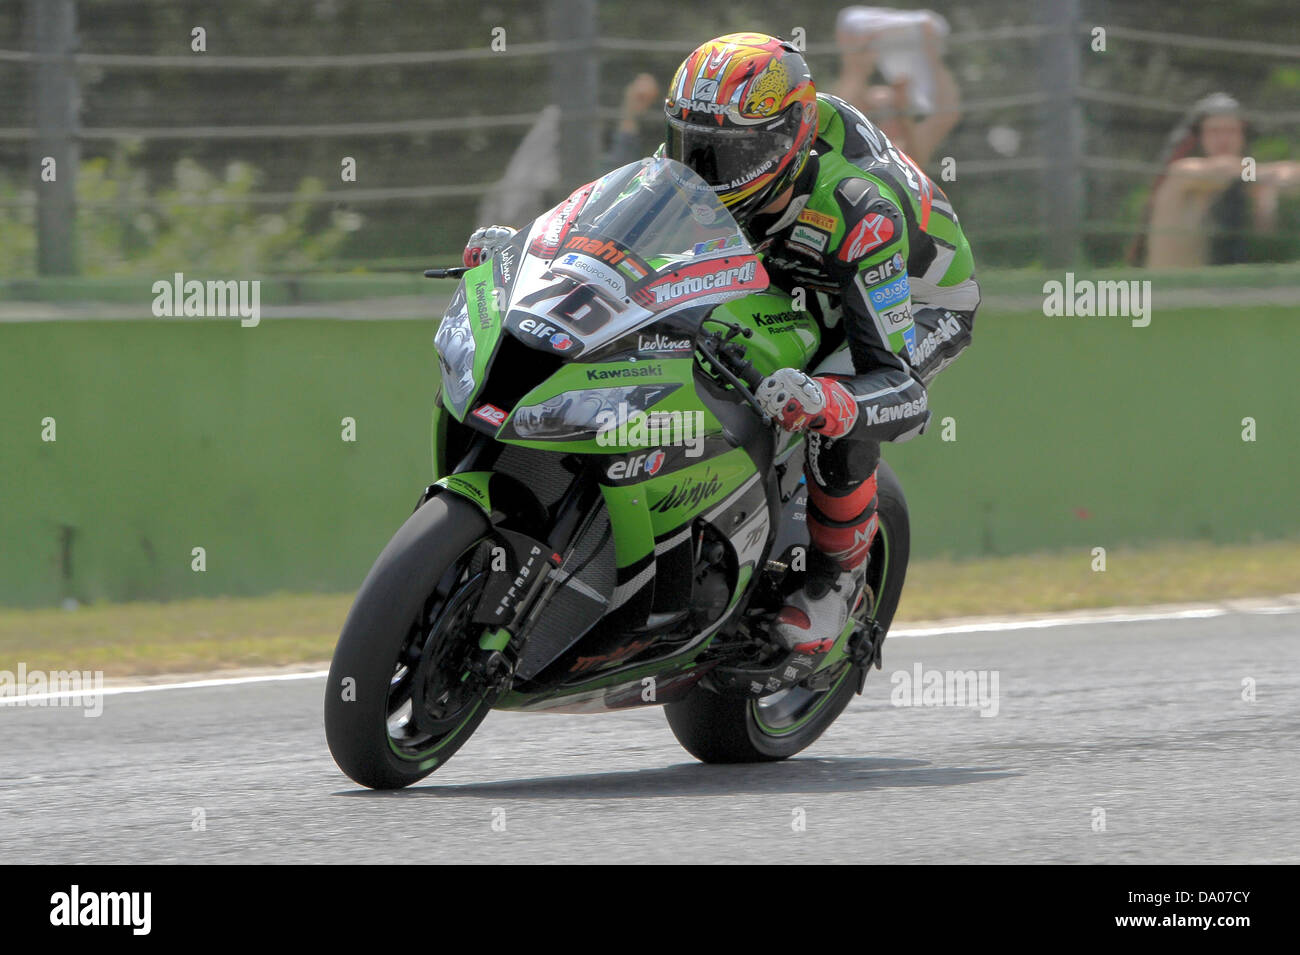 Imola, Italy. 29th June 2013. Loris Baz  during the World Superbikes Championships from Imola. Stock Photo